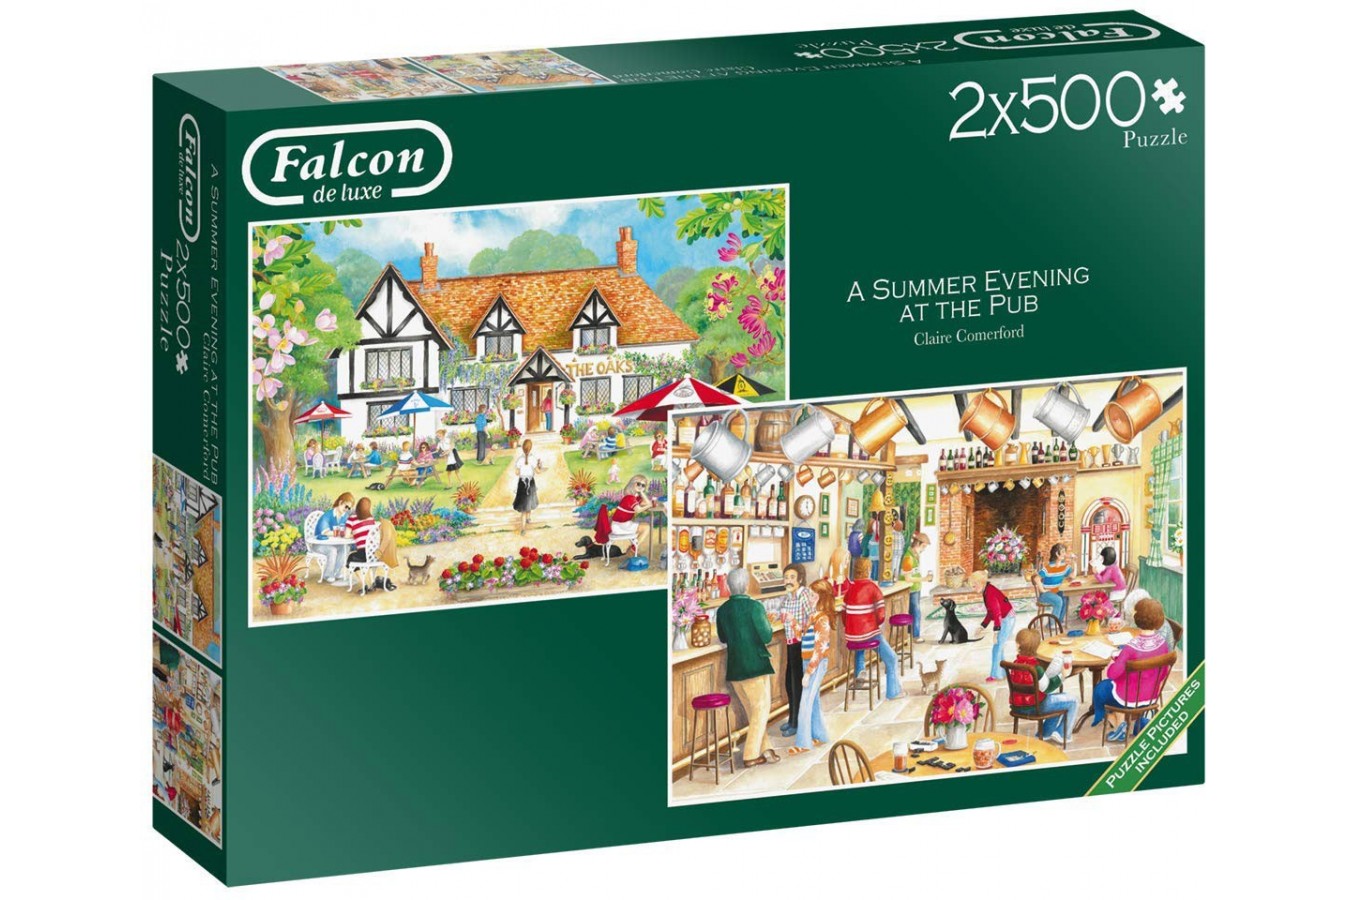 Puzzle Falcon - Summer Evening at The Pub, 2x500 piese (Jumbo-11242)